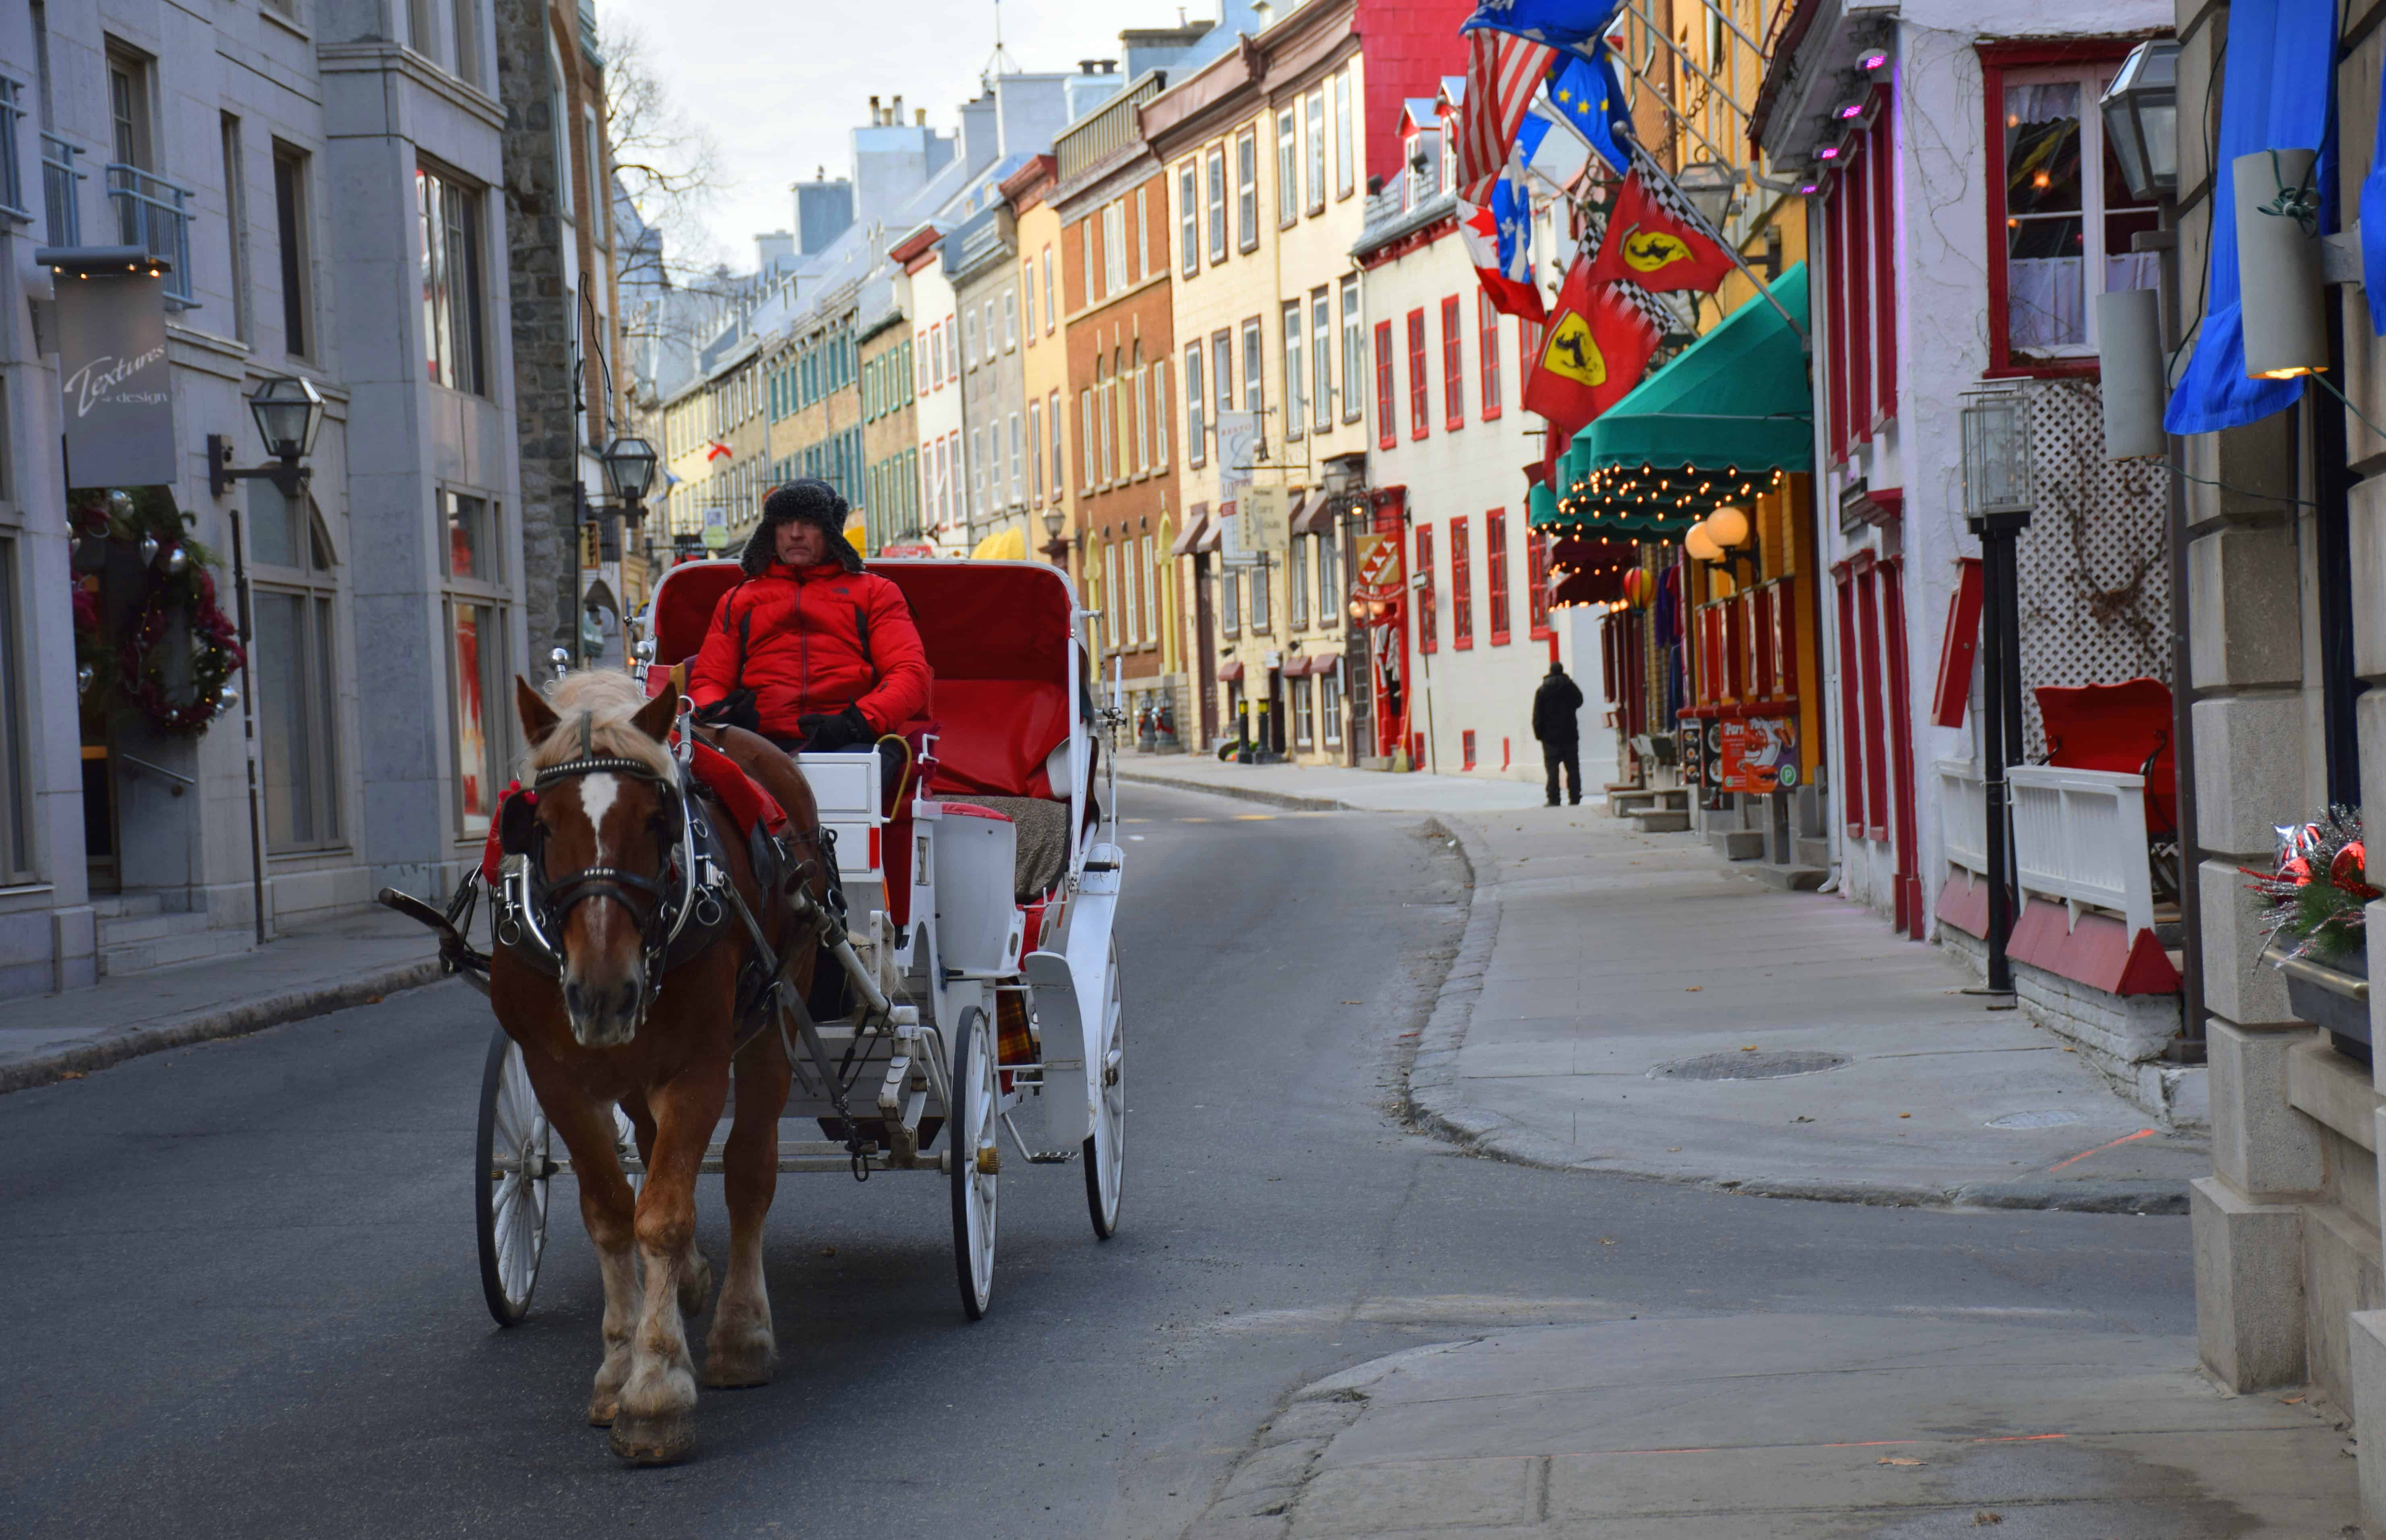 A tour on a caleche is one of the unique things to do in old Quebec City